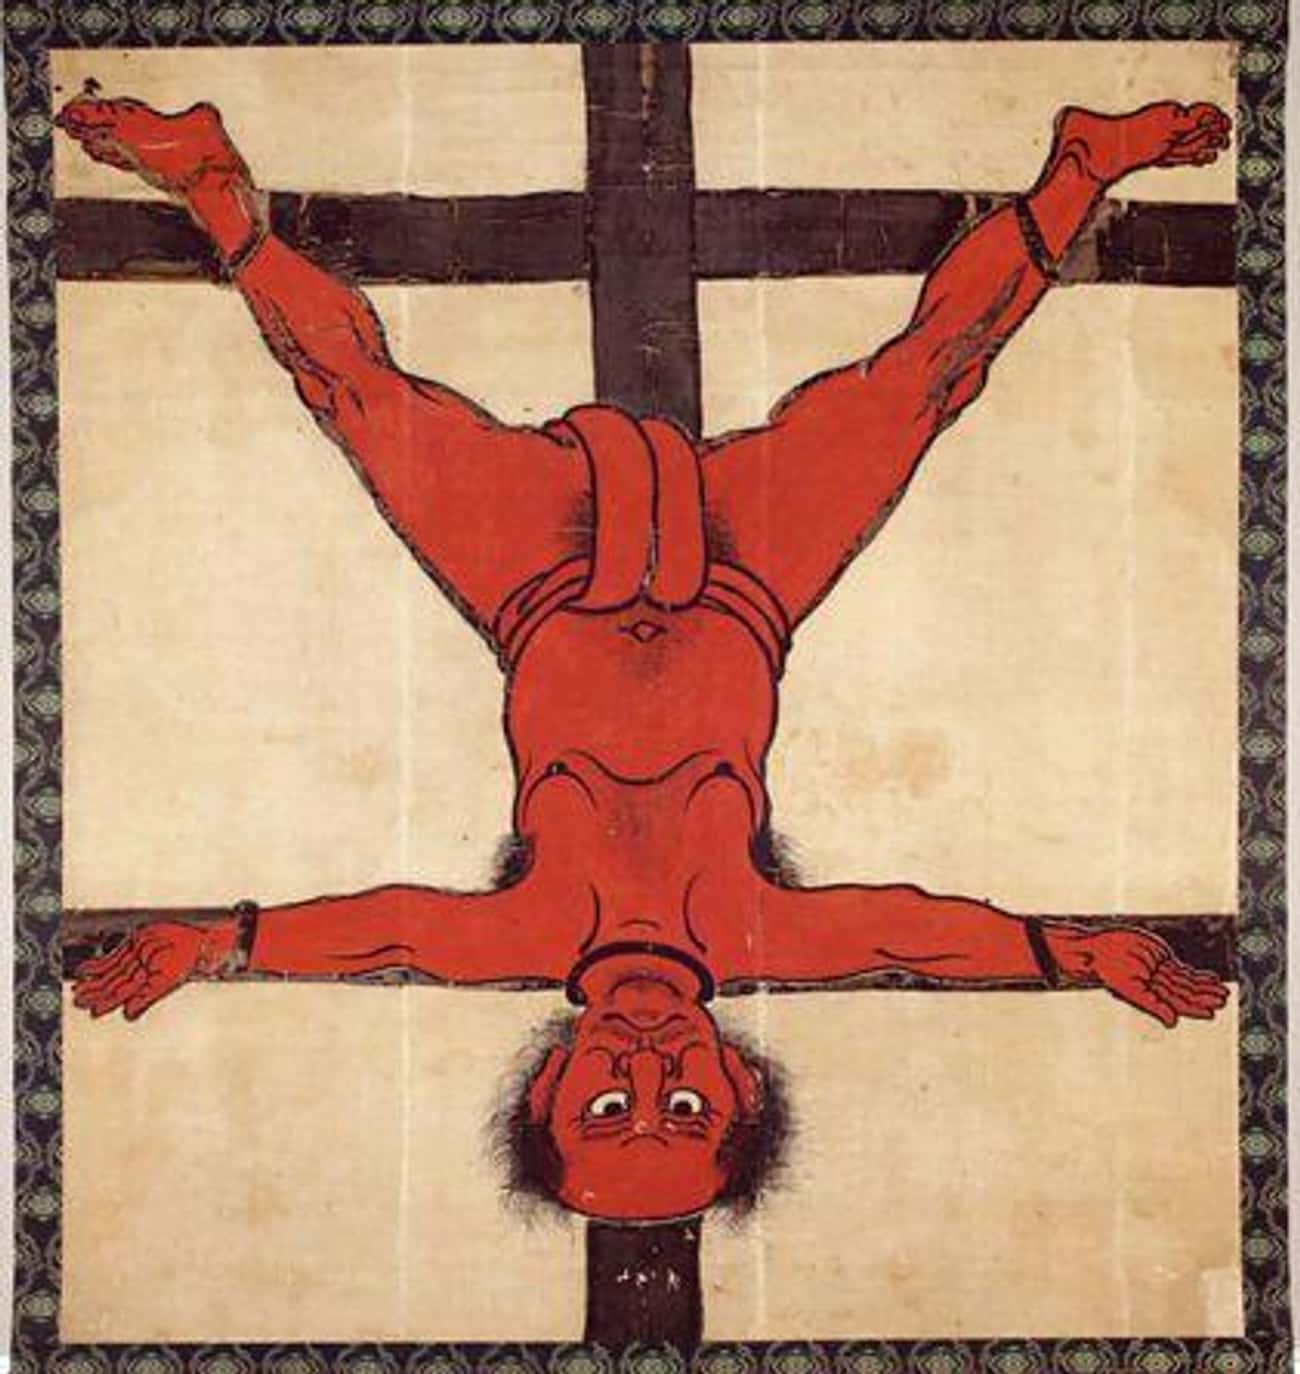 Torture Escalated And Included Reverse Crucifixions, Where An Individual Would Be Lowered Into A Hole Of Excrement